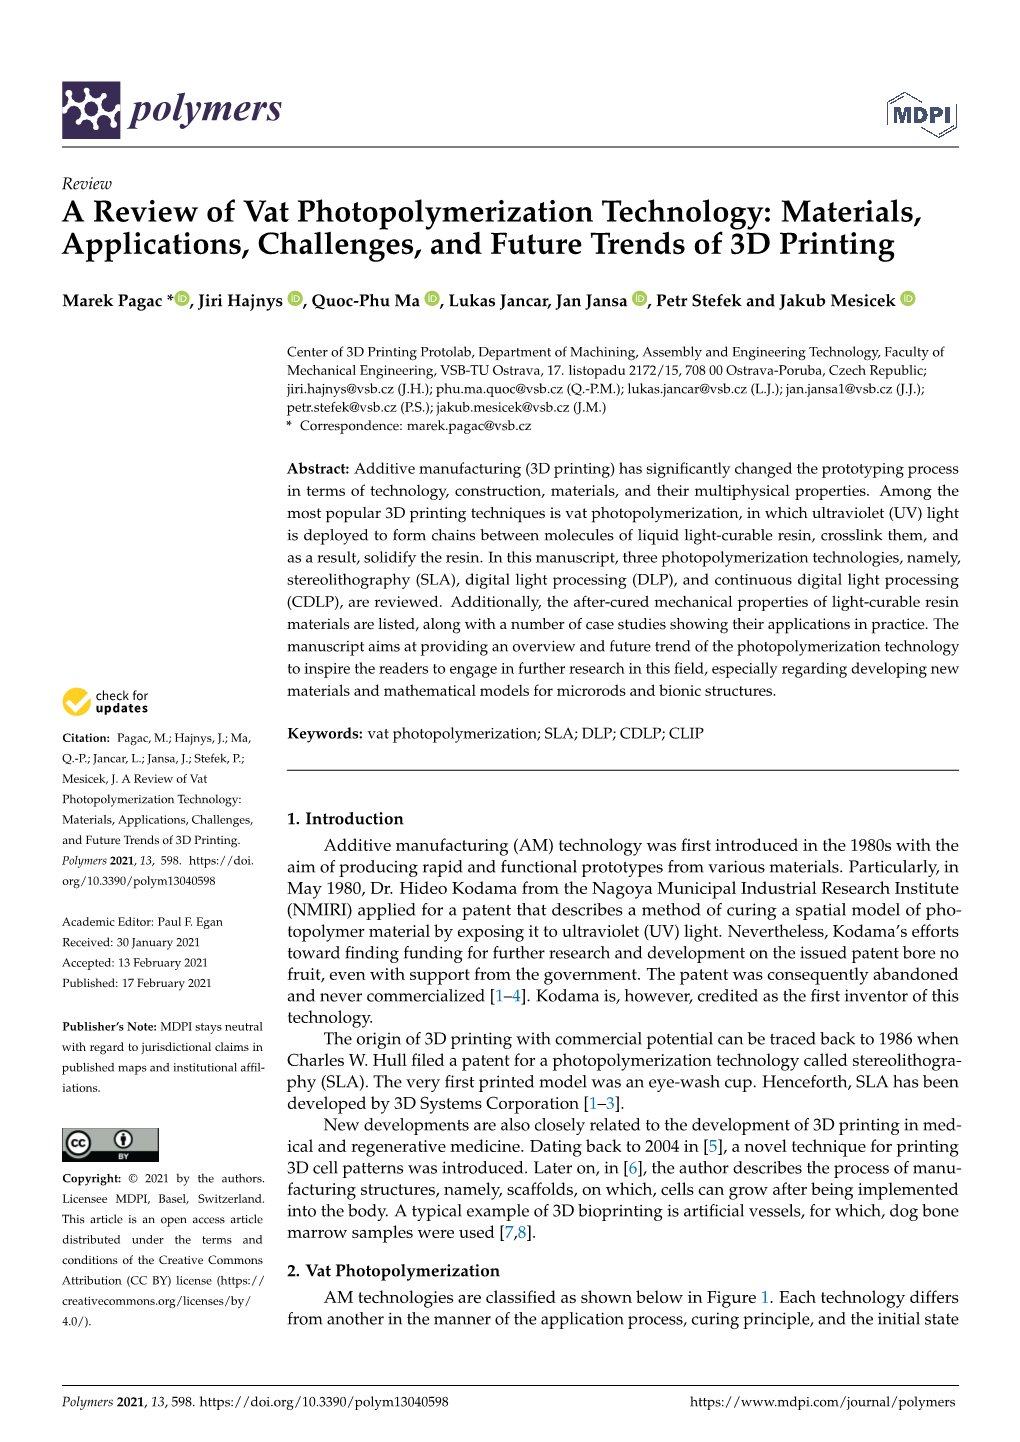 A Review of Vat Photopolymerization Technology: Materials, Applications, Challenges, and Future Trends of 3D Printing